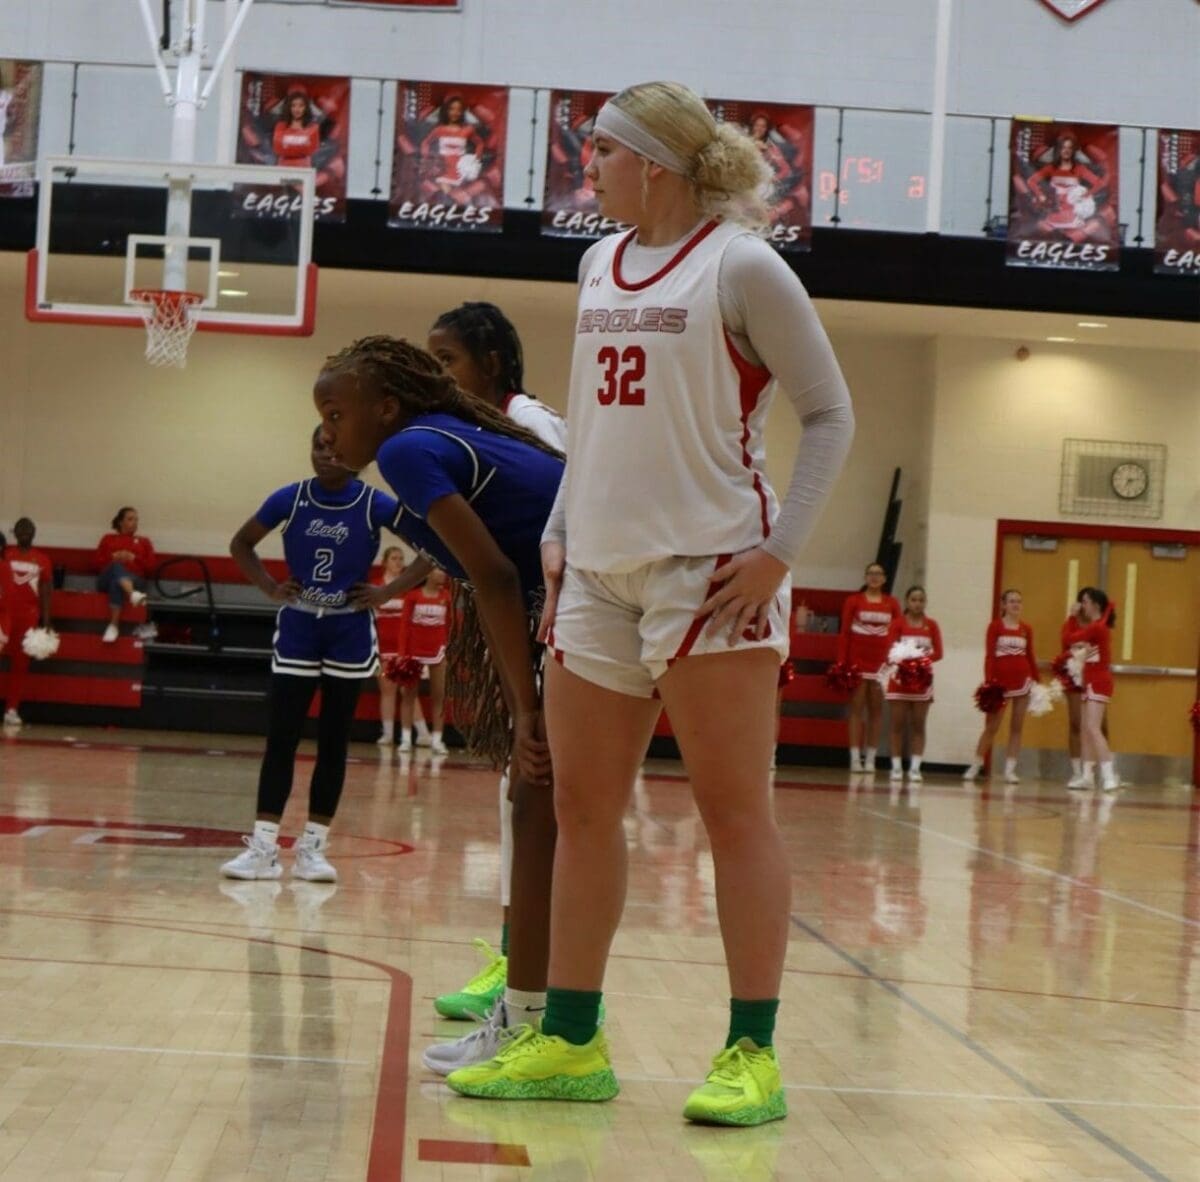 Smyrna girls basketball Kylie Jones hit four three pointers in their win over Appoquinimink photo courtesy of Hudl